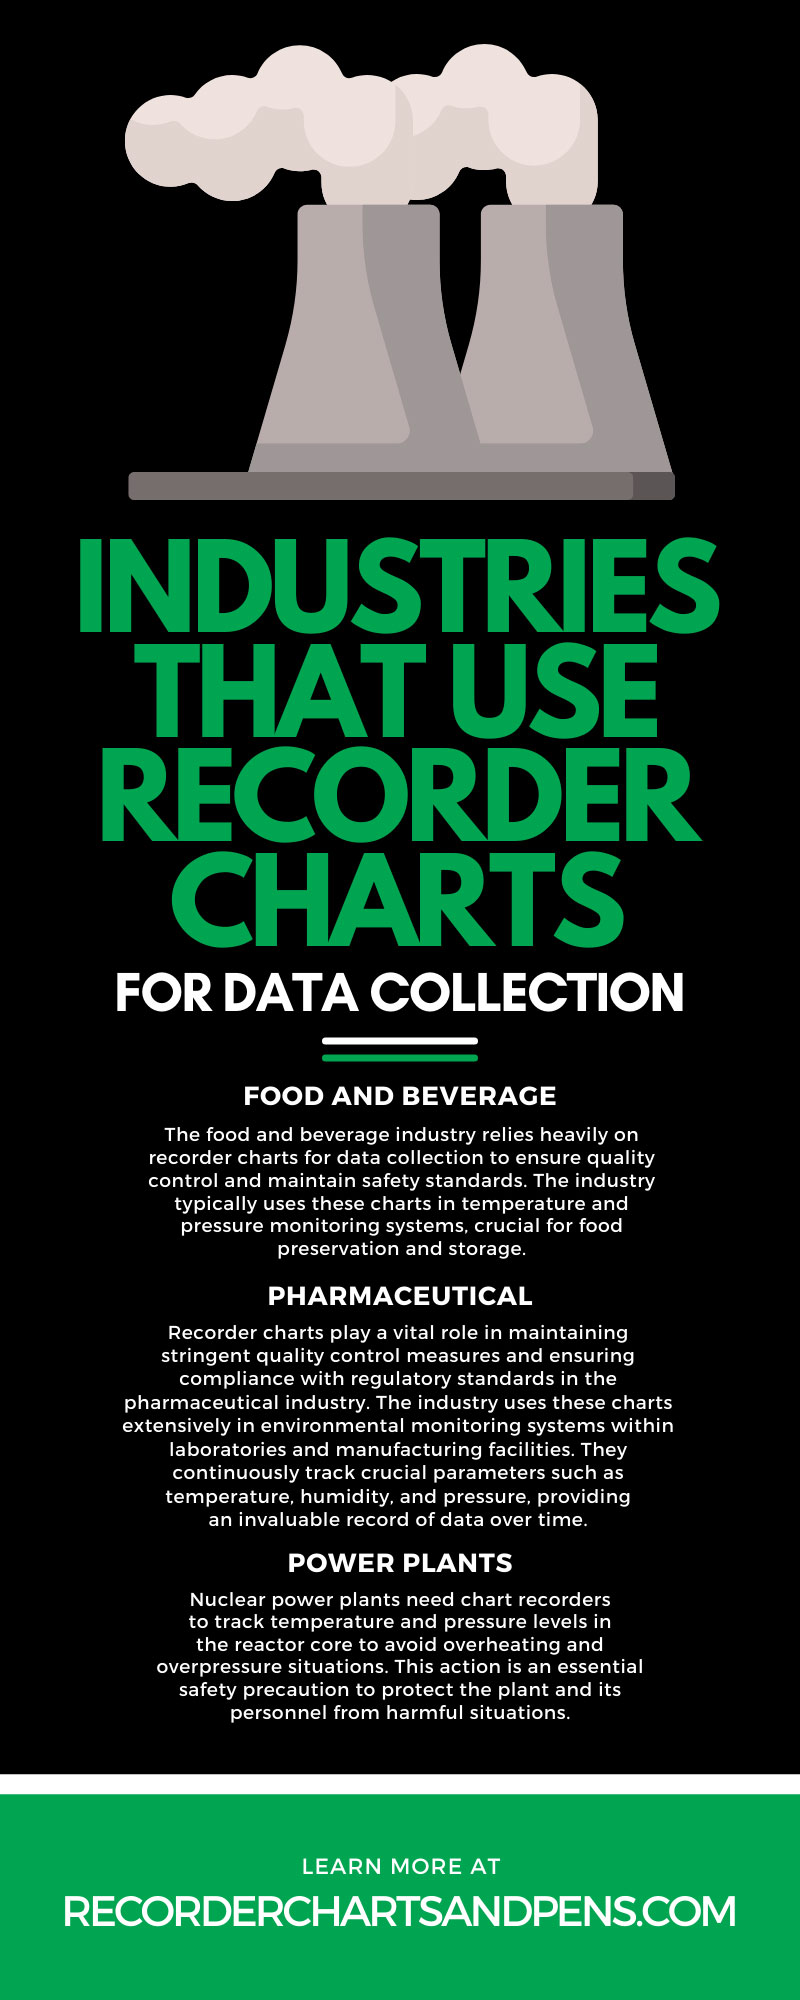 7 Industries That Use Recorder Charts for Data Collection